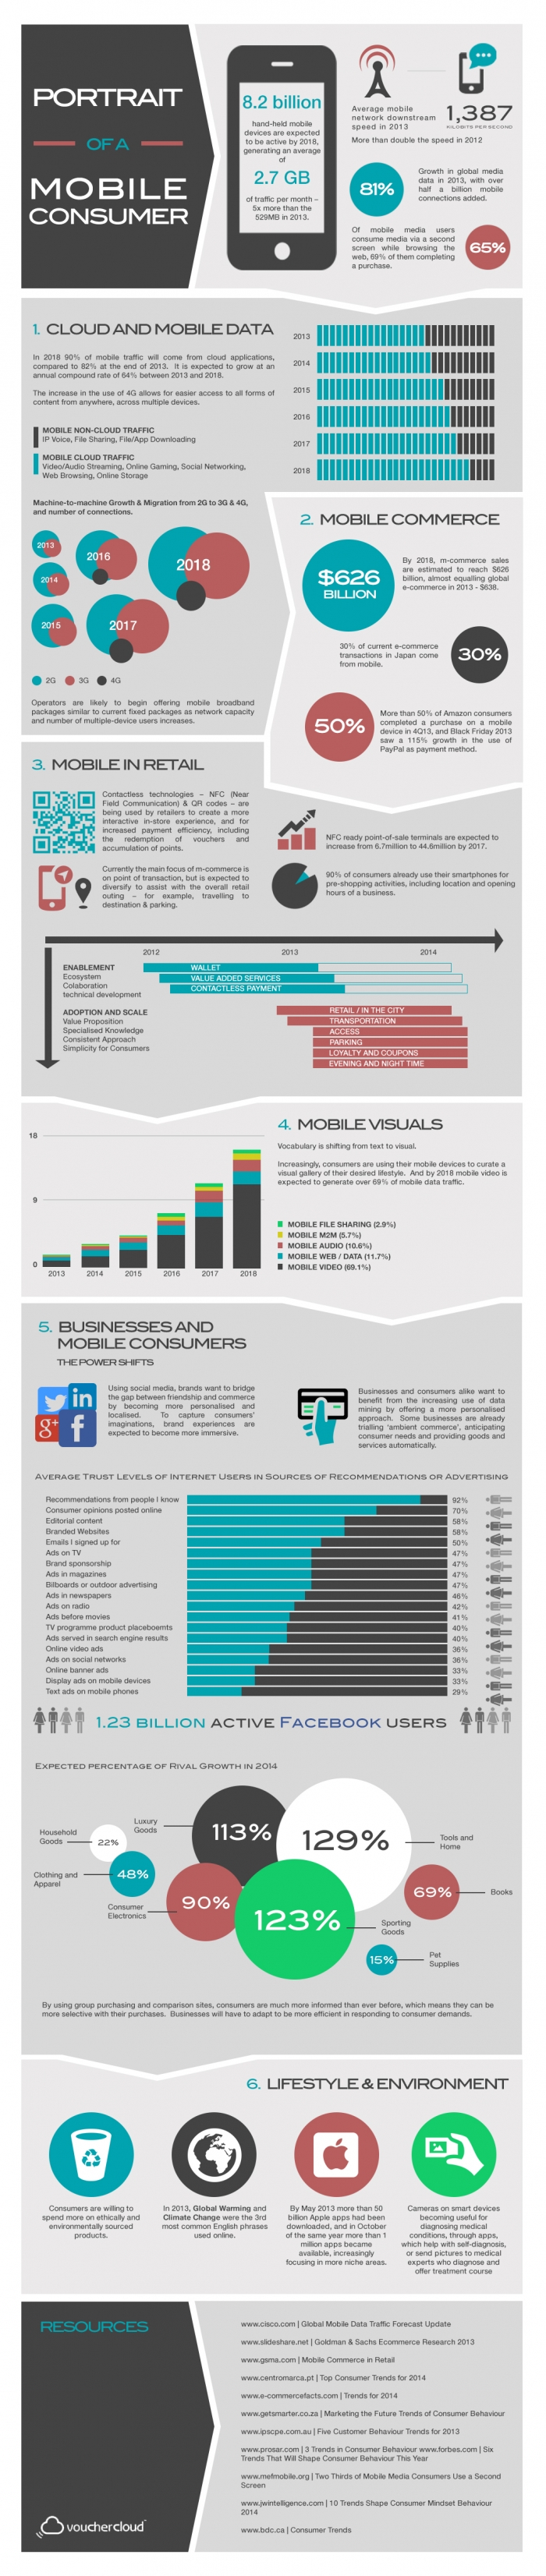 infographic Email_instant_Mobile_Consumer_infographic